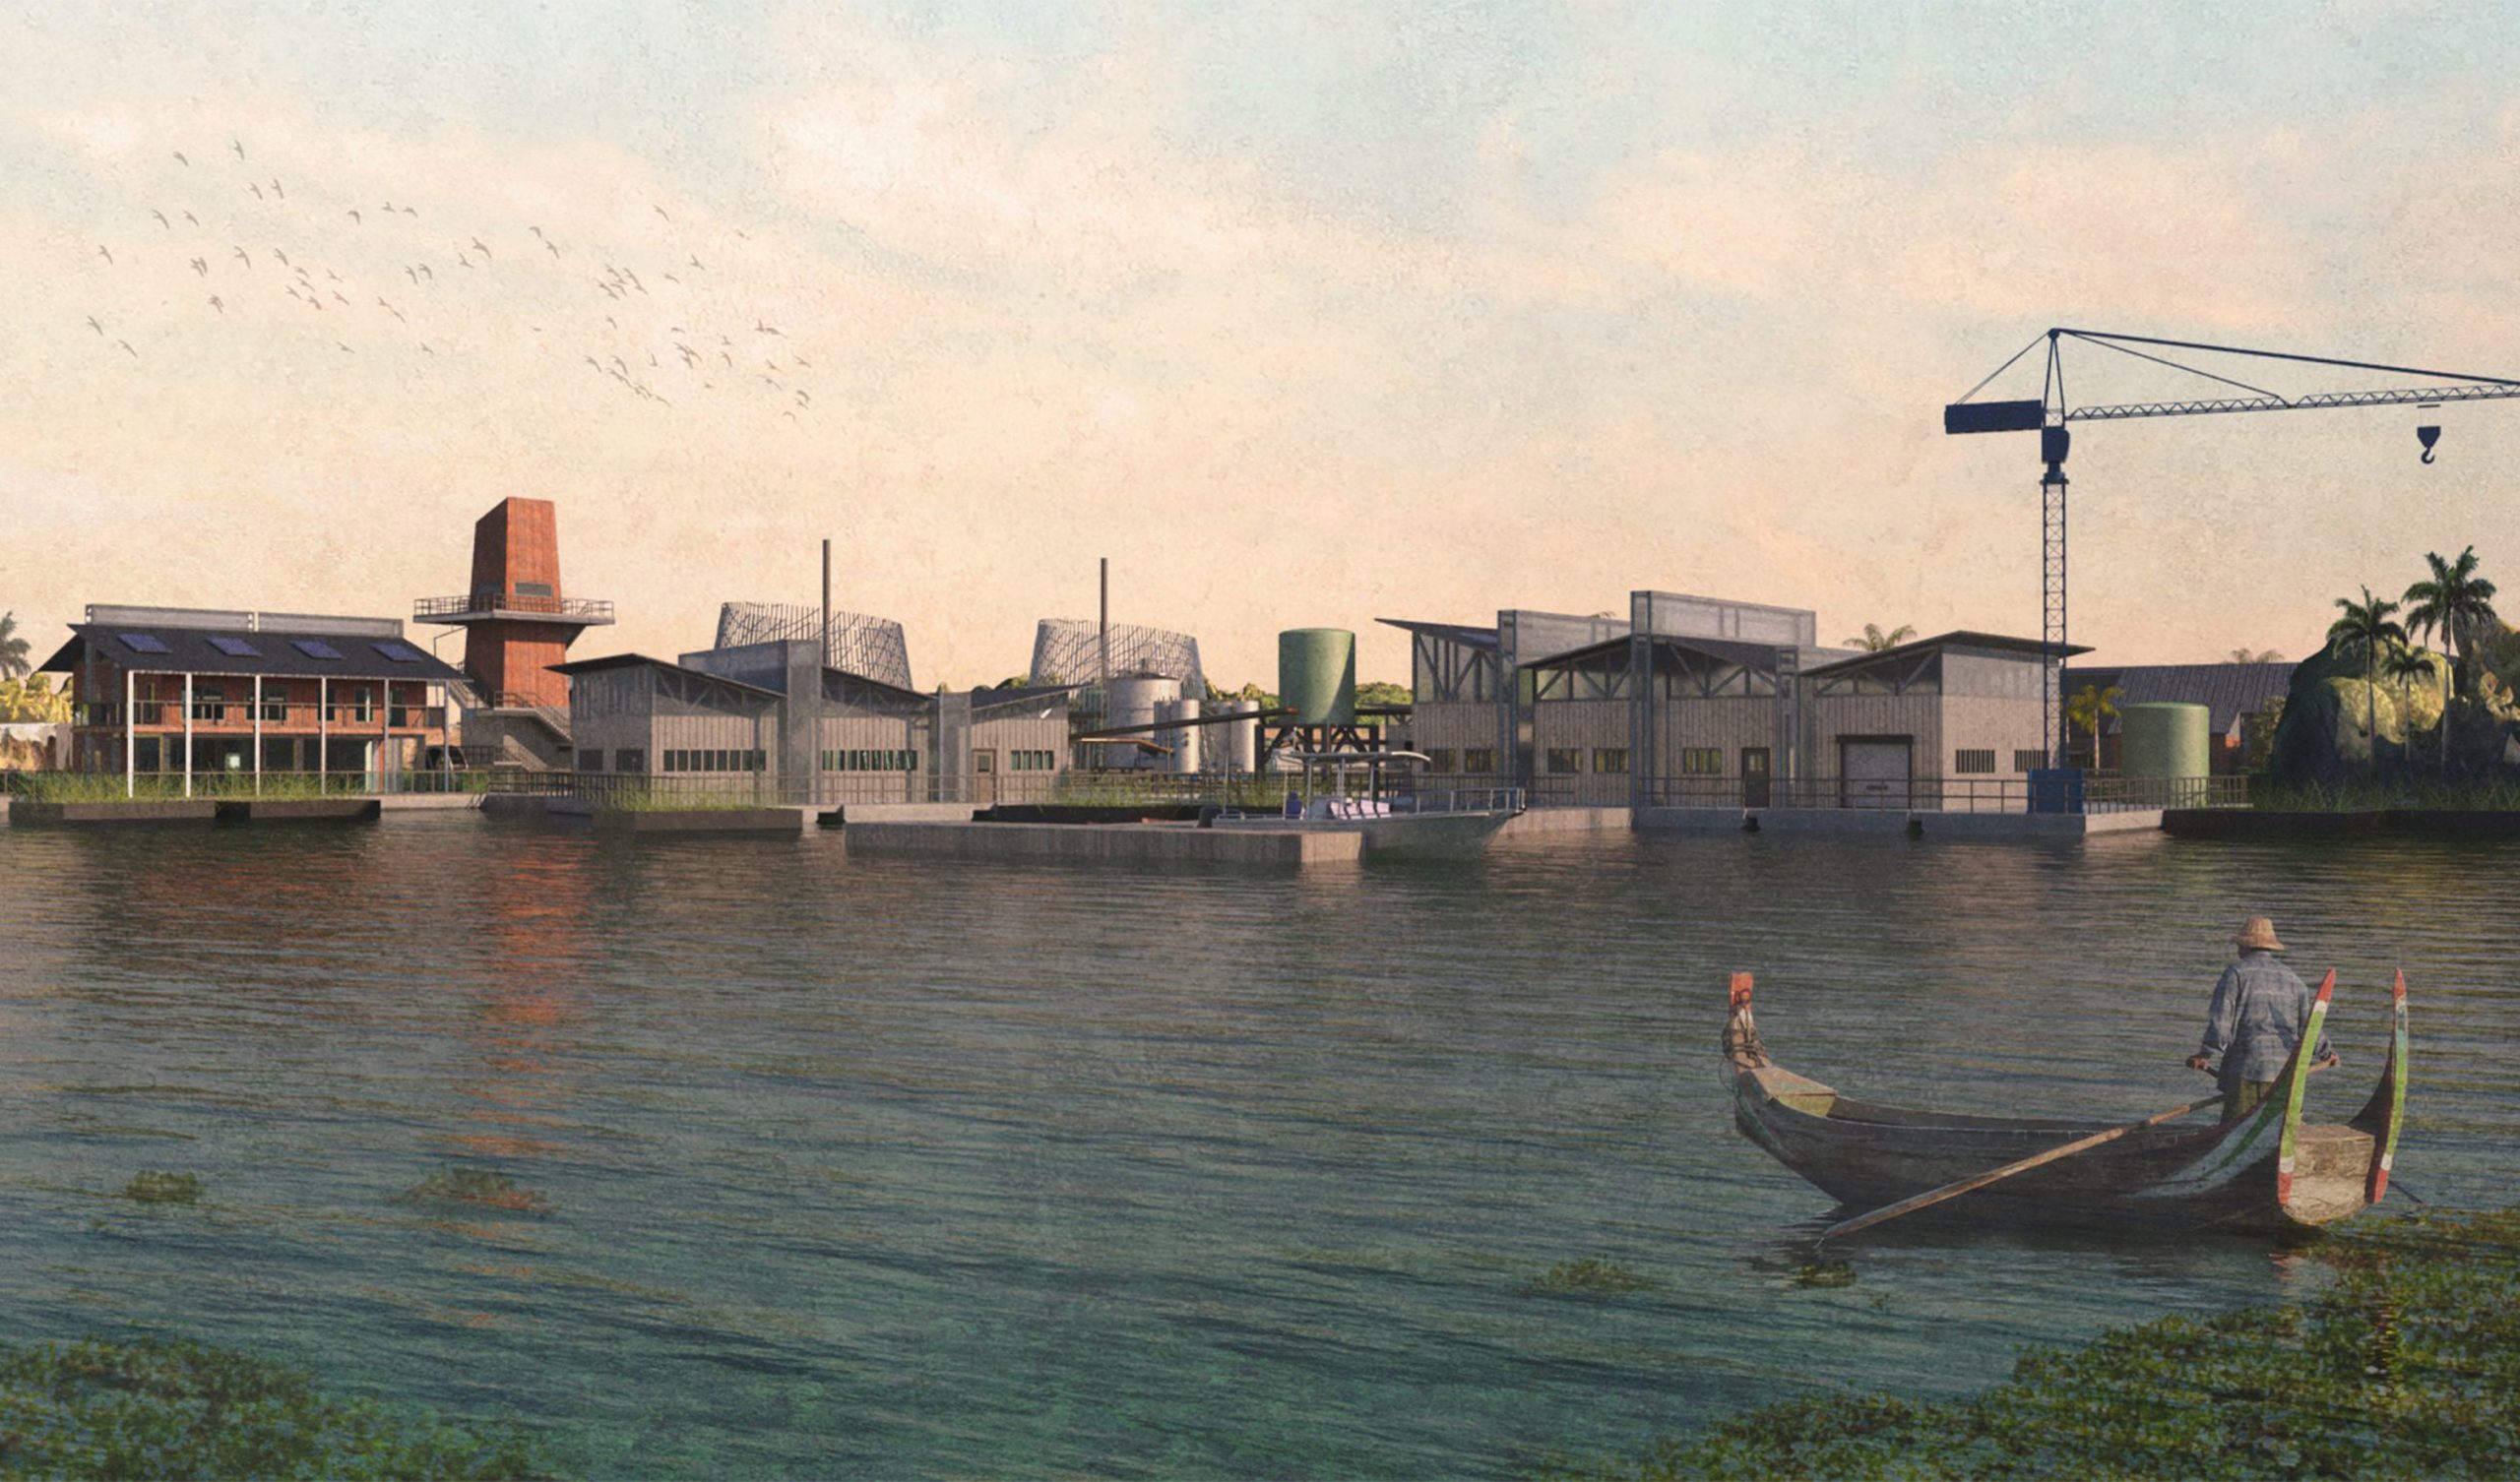 Cover image showing the site from the water